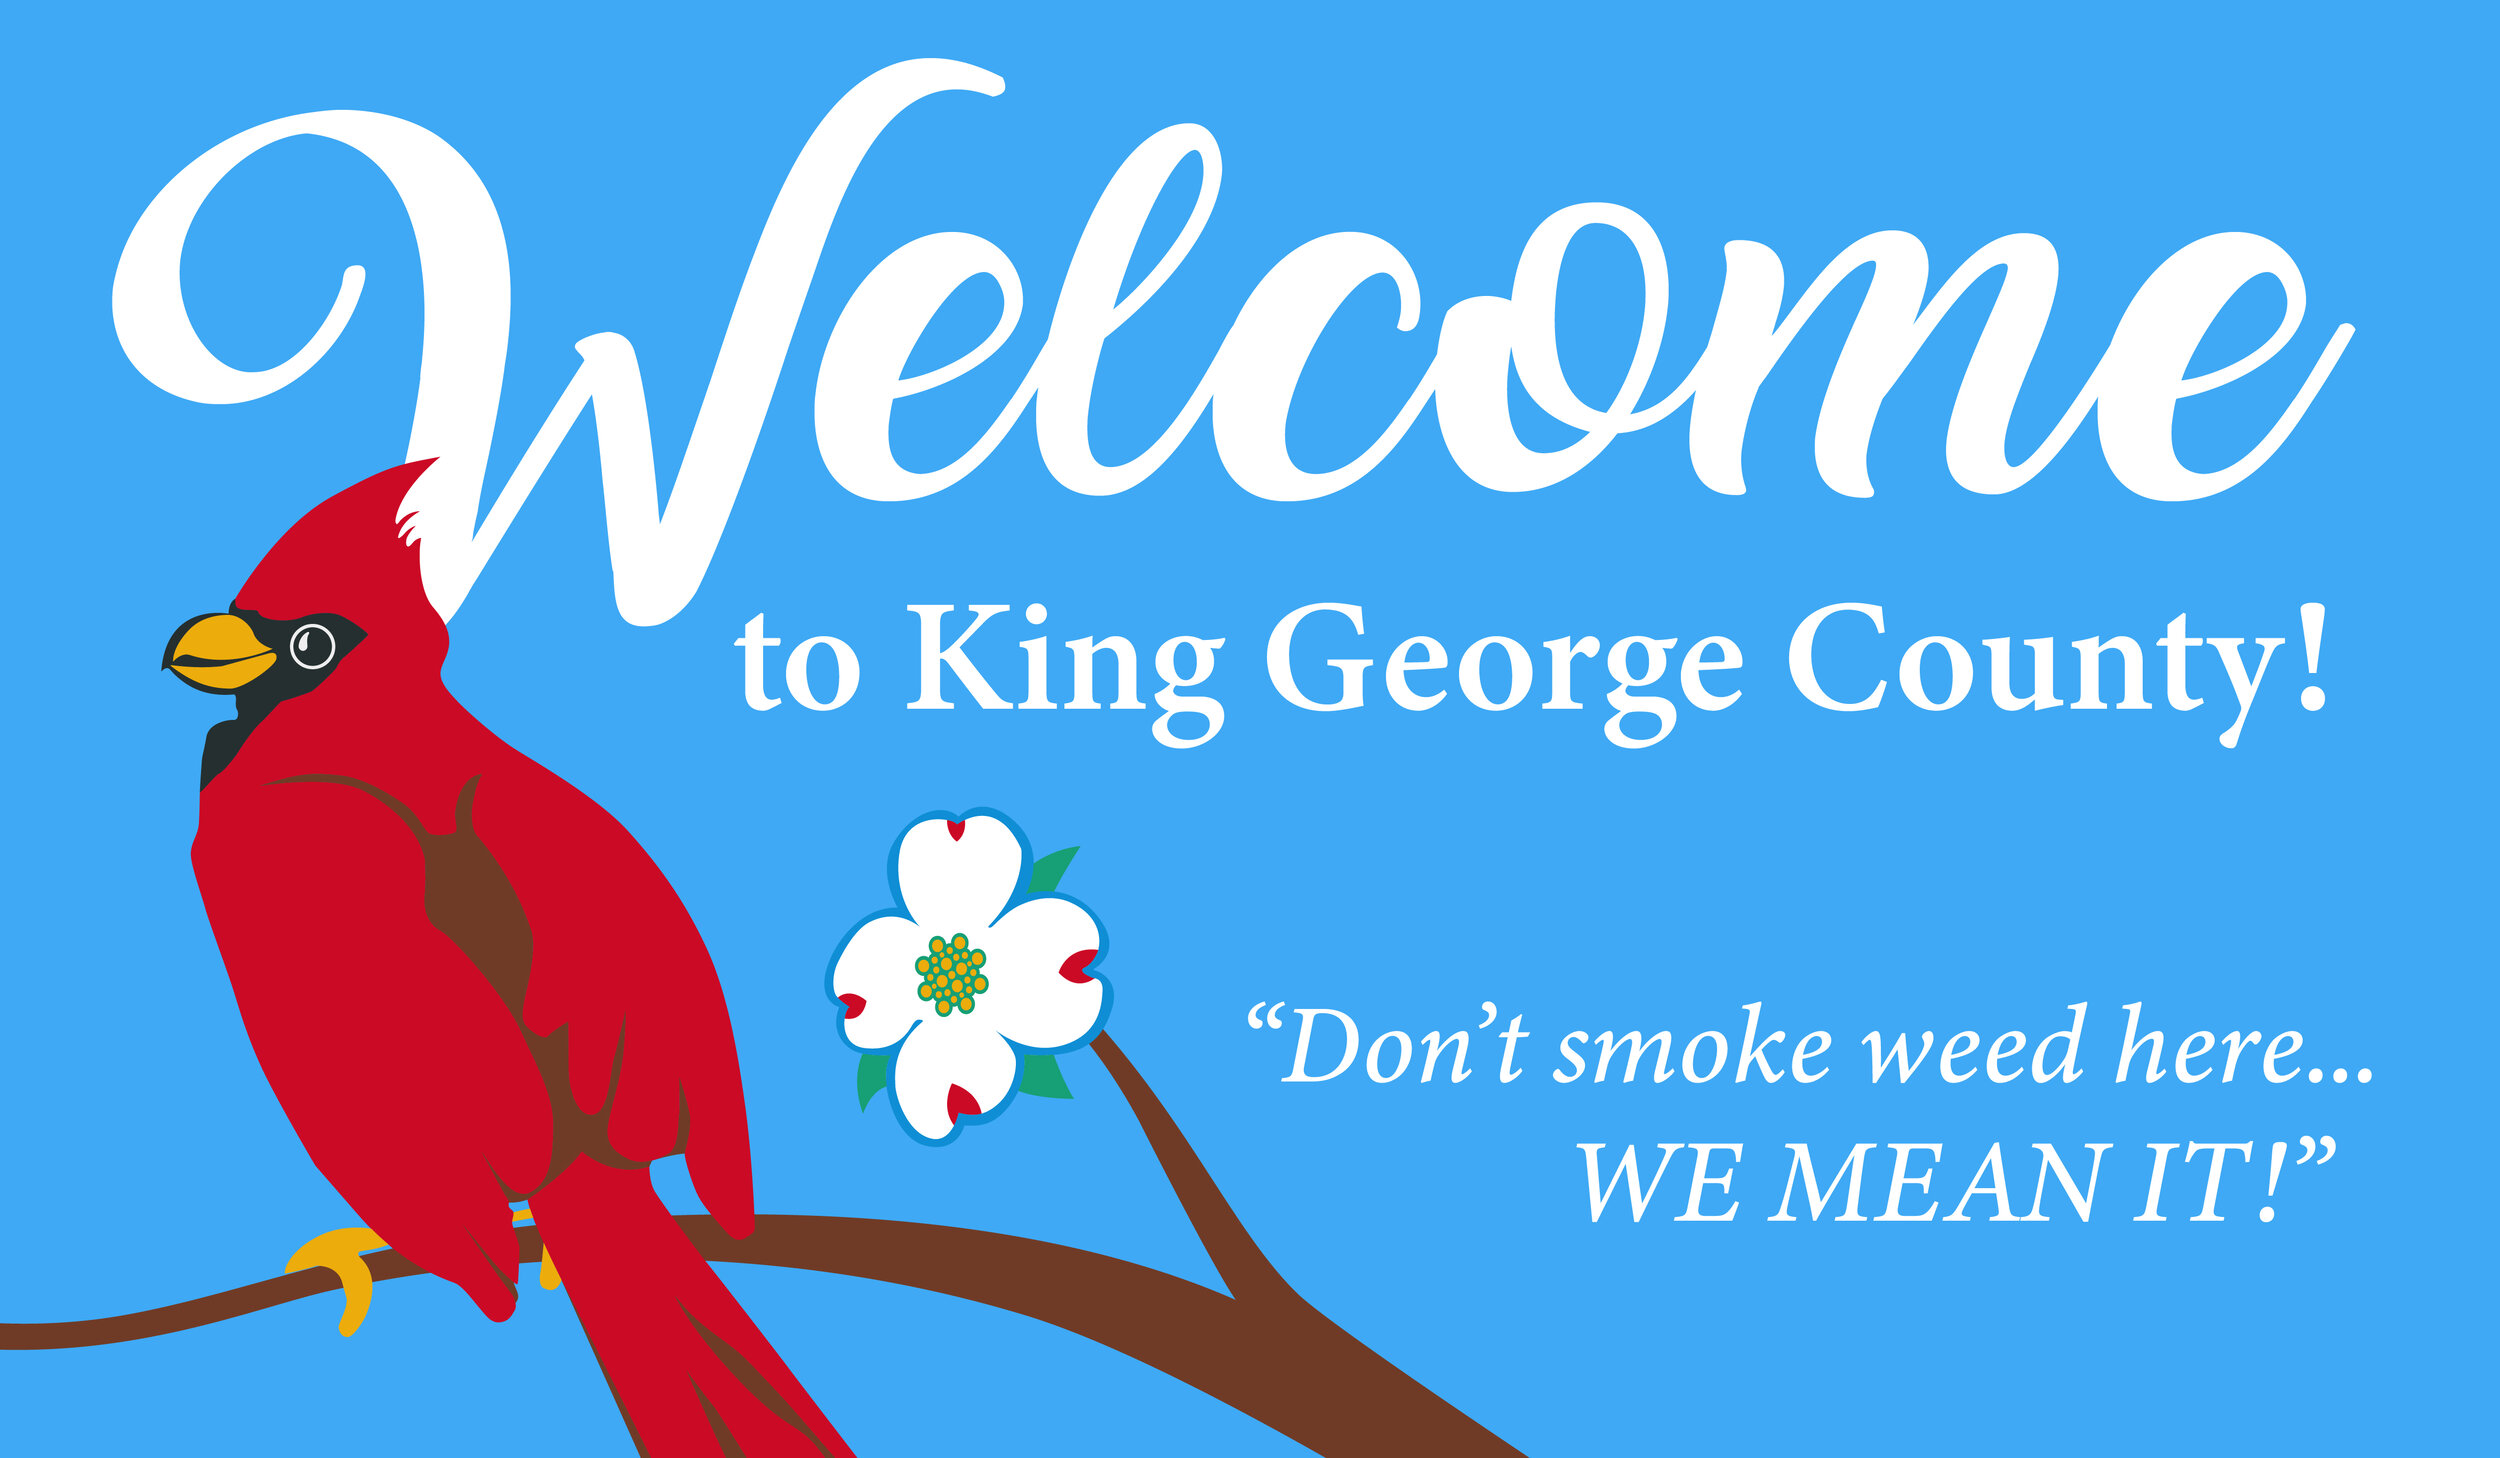 Virginia’s King George County Wants To Keep Cannabis Illegal